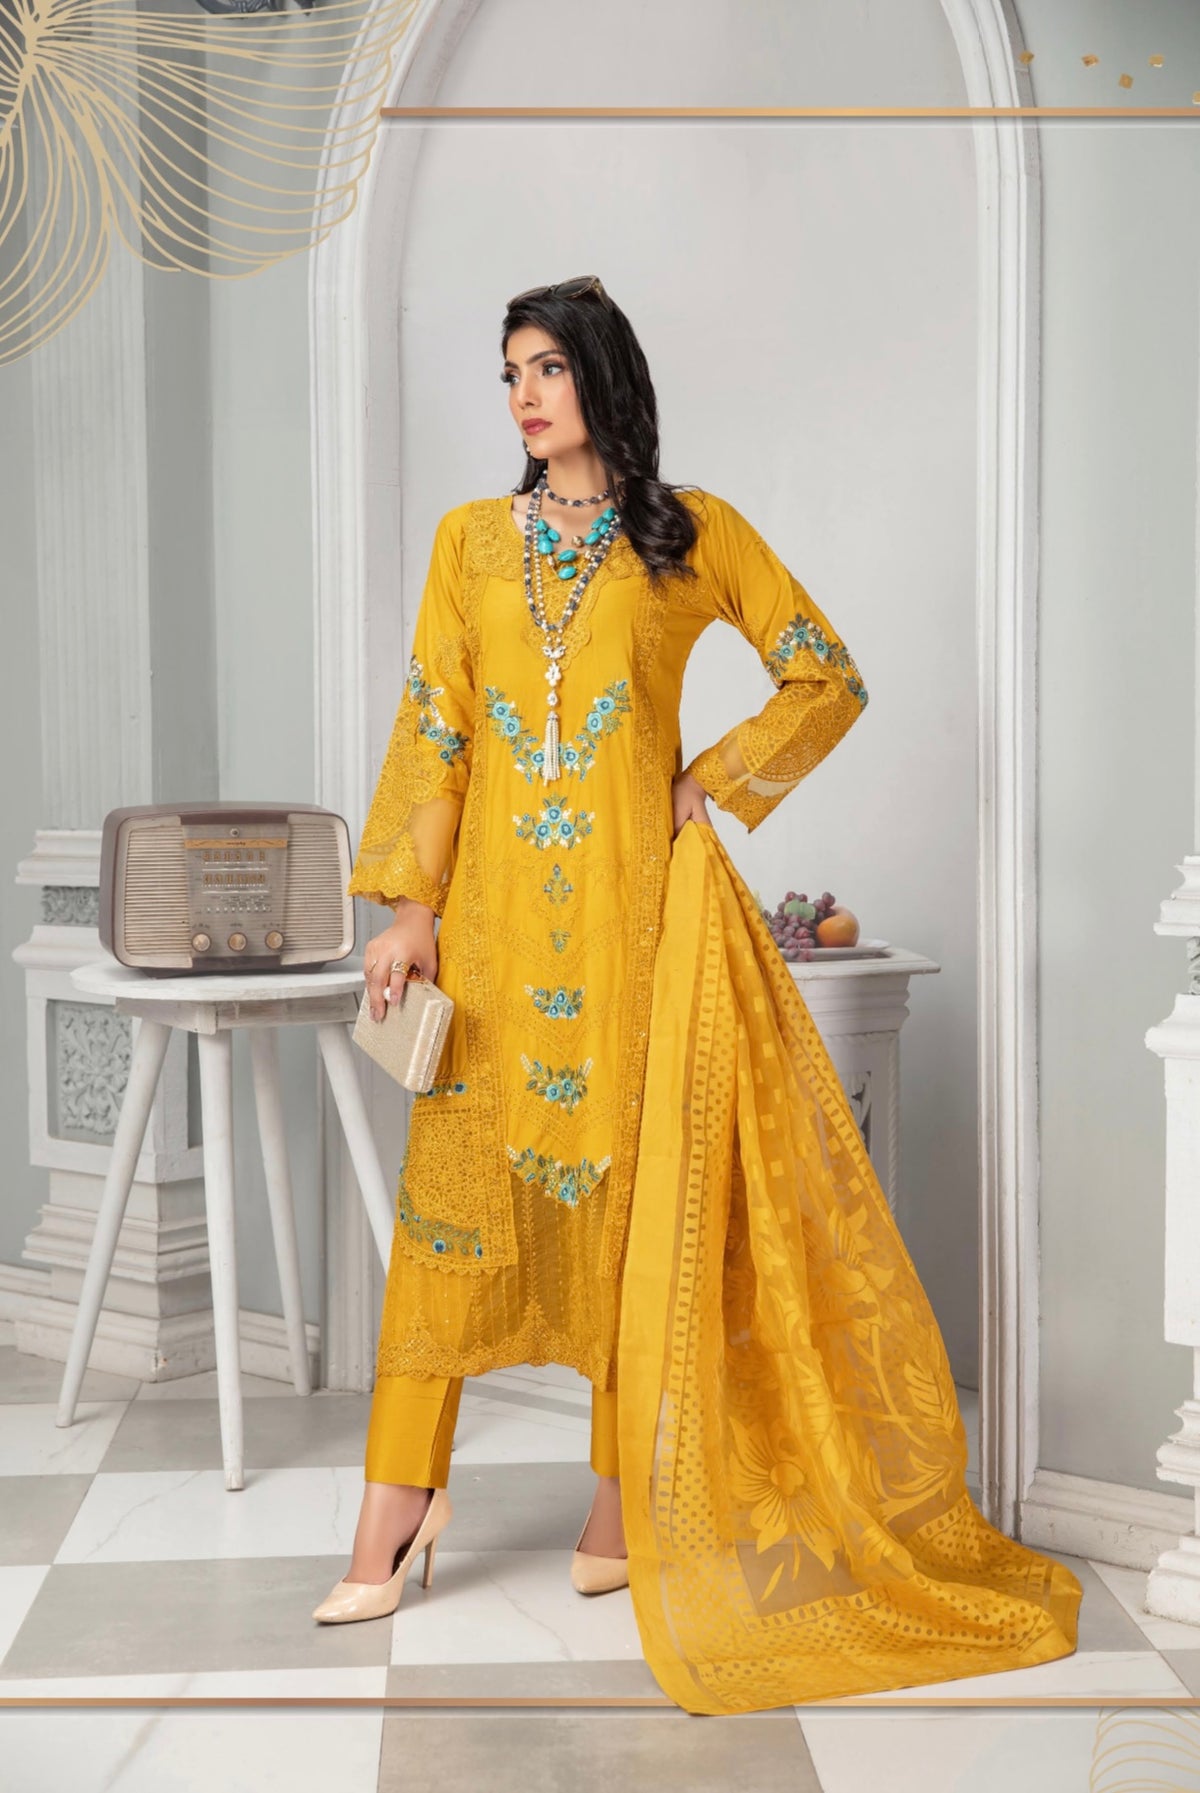 Maria B Inspired Embroidered Long Mustard Kameez 3 Piece Outfit With Net Dupatta